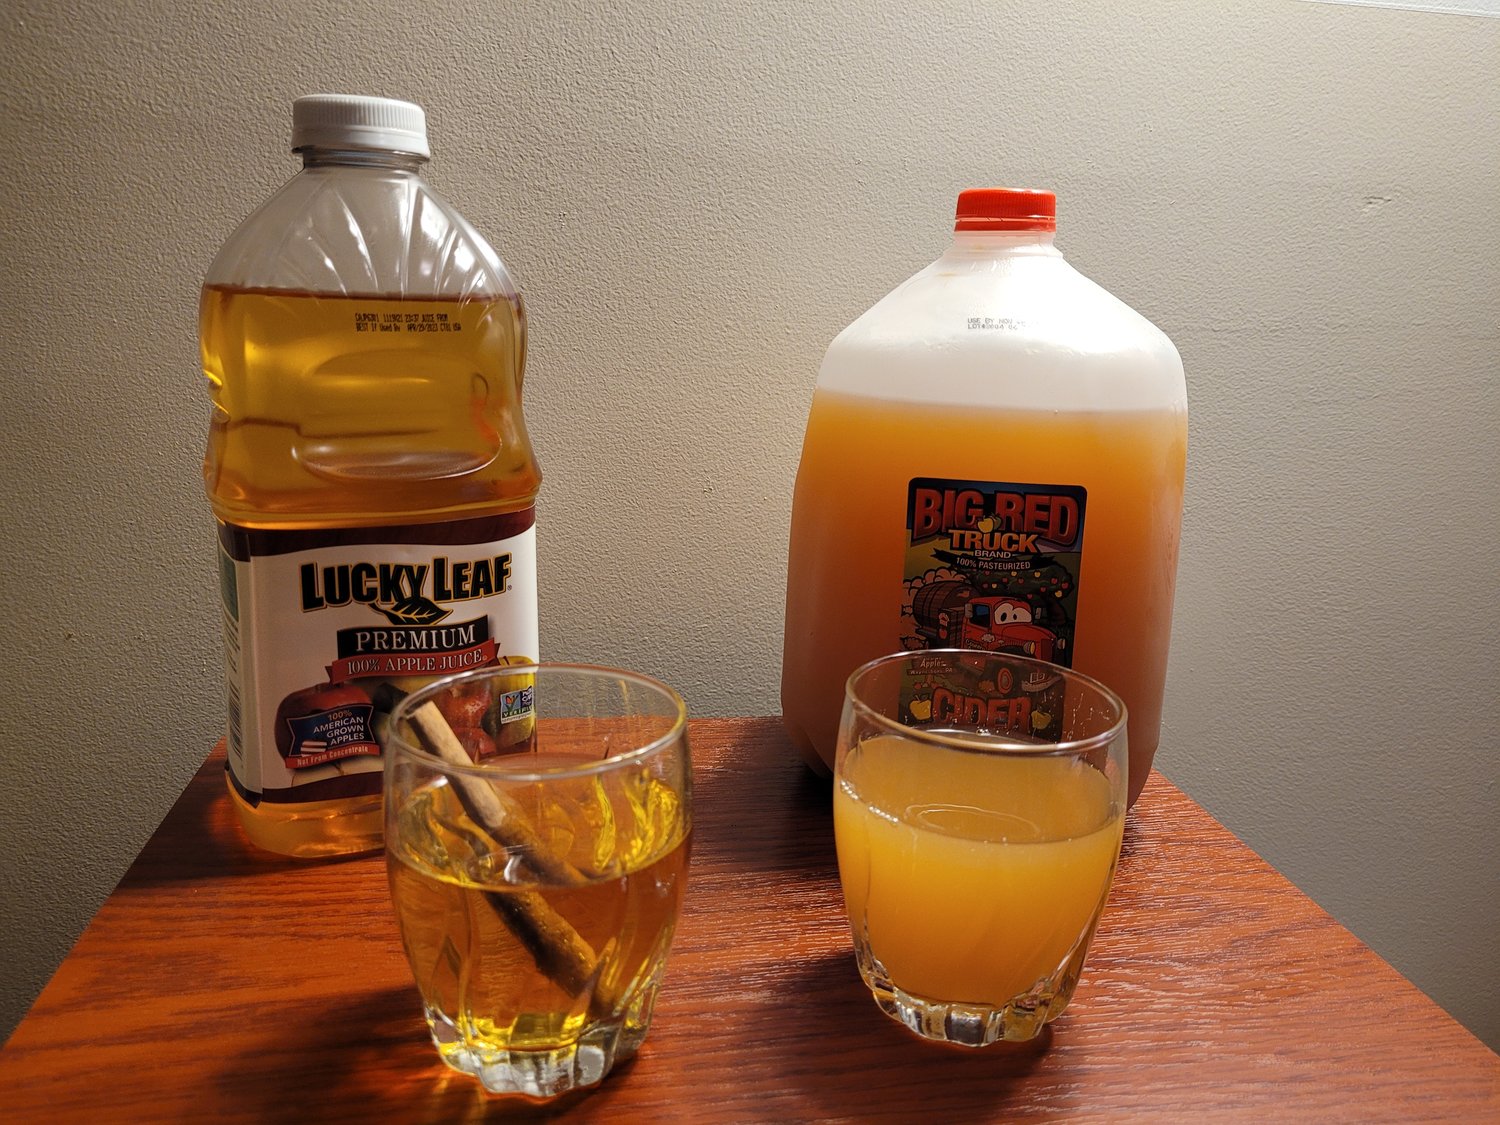 Store-bought cider versus homemade from apple juice. Try it for yourself.